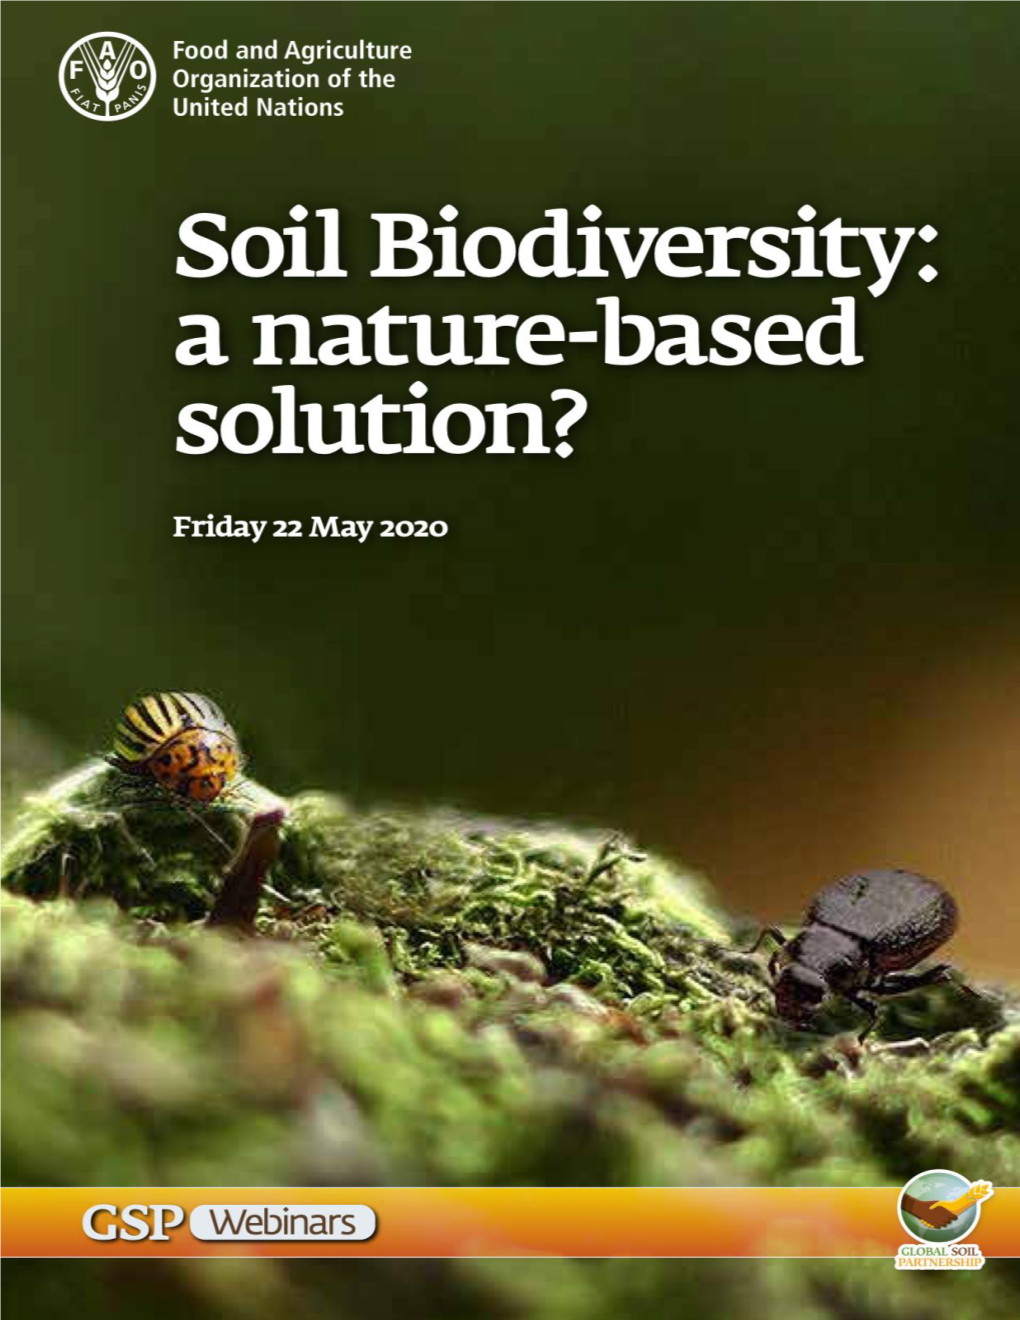 Soil Biodiversity: a Nature-Based Solution?”